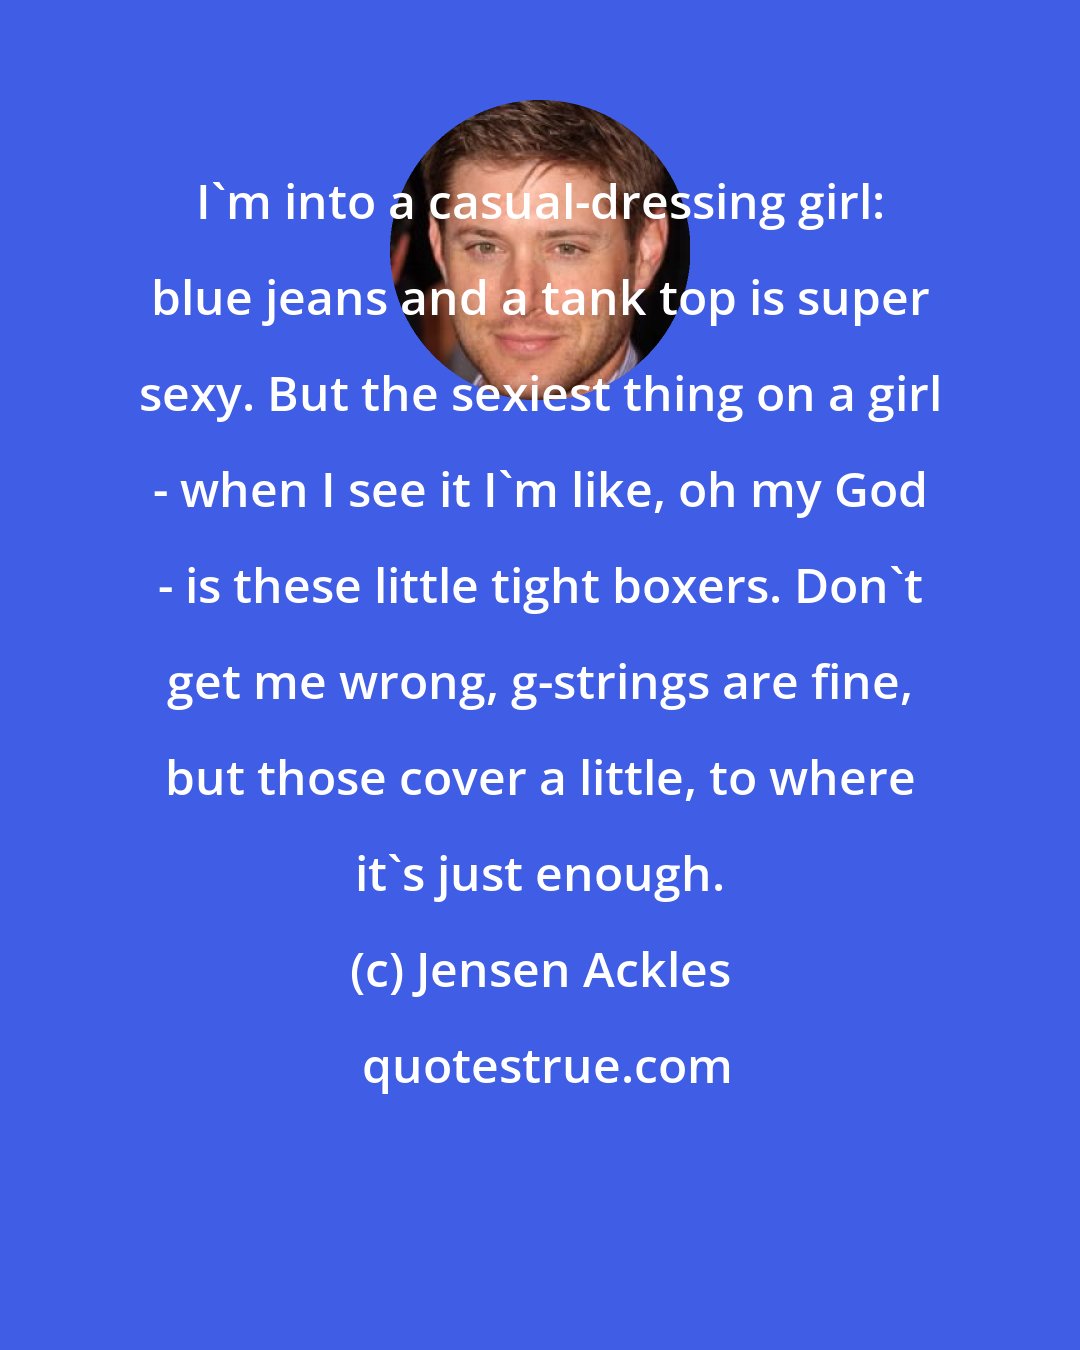 Jensen Ackles: I'm into a casual-dressing girl: blue jeans and a tank top is super sexy. But the sexiest thing on a girl - when I see it I'm like, oh my God - is these little tight boxers. Don't get me wrong, g-strings are fine, but those cover a little, to where it's just enough.